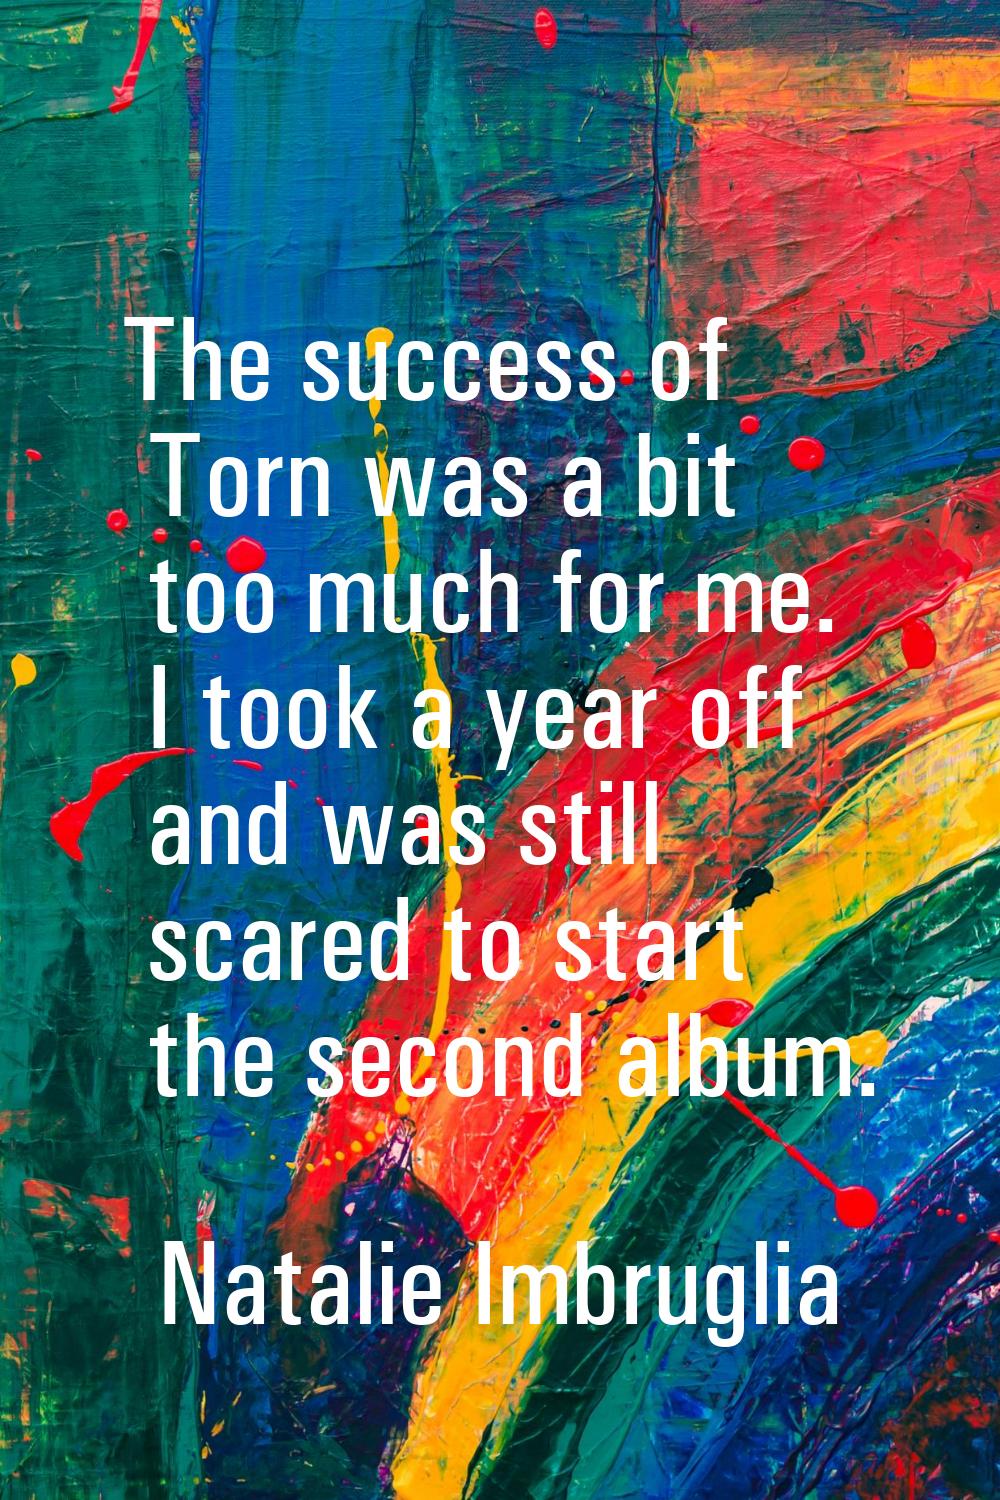 The success of Torn was a bit too much for me. I took a year off and was still scared to start the 